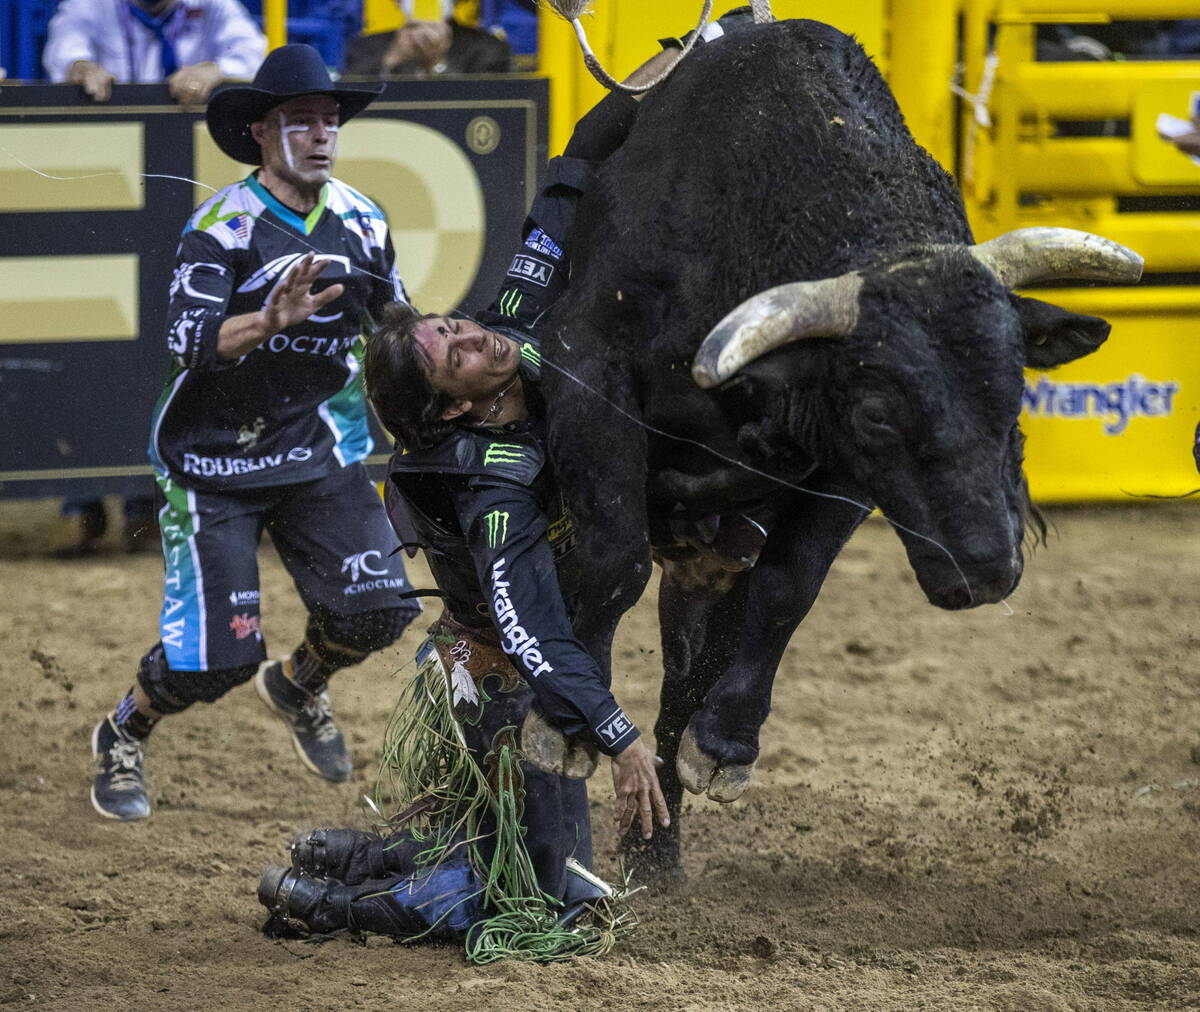 J.B. Mauney injured during frightening spill on bull at NFR National